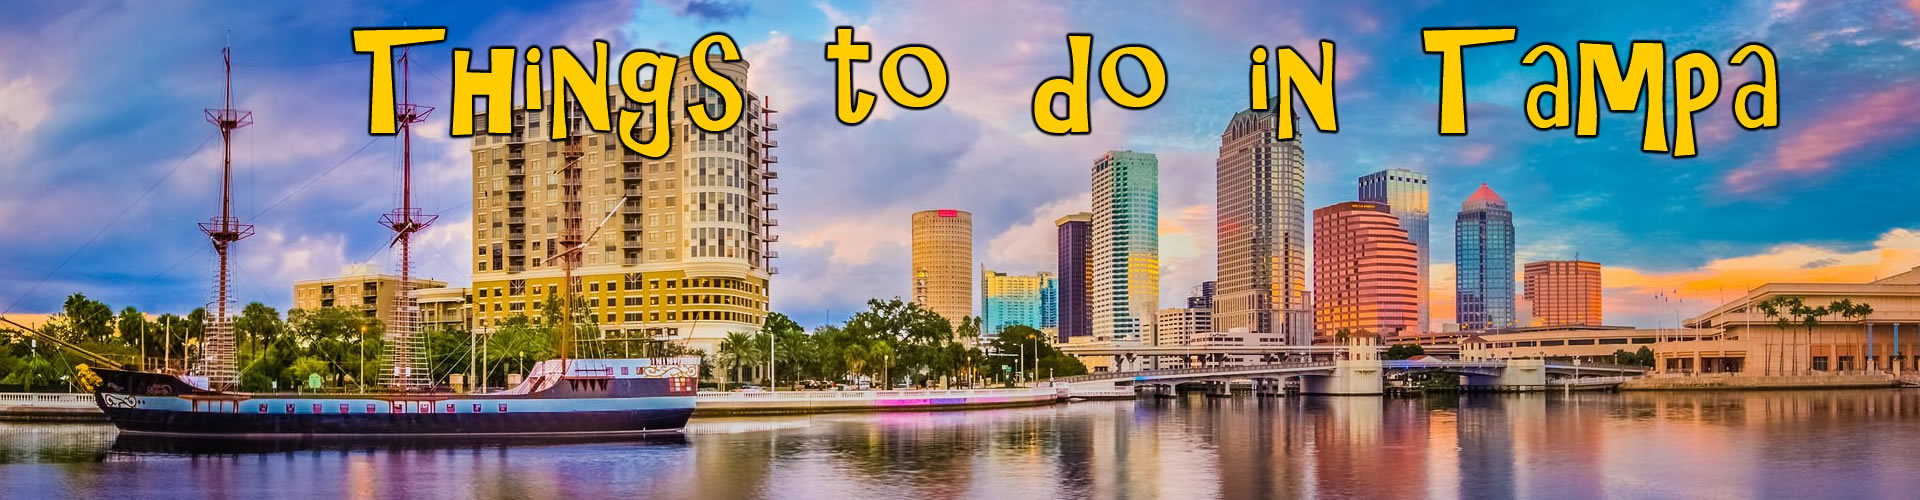 Things to do in Tampa